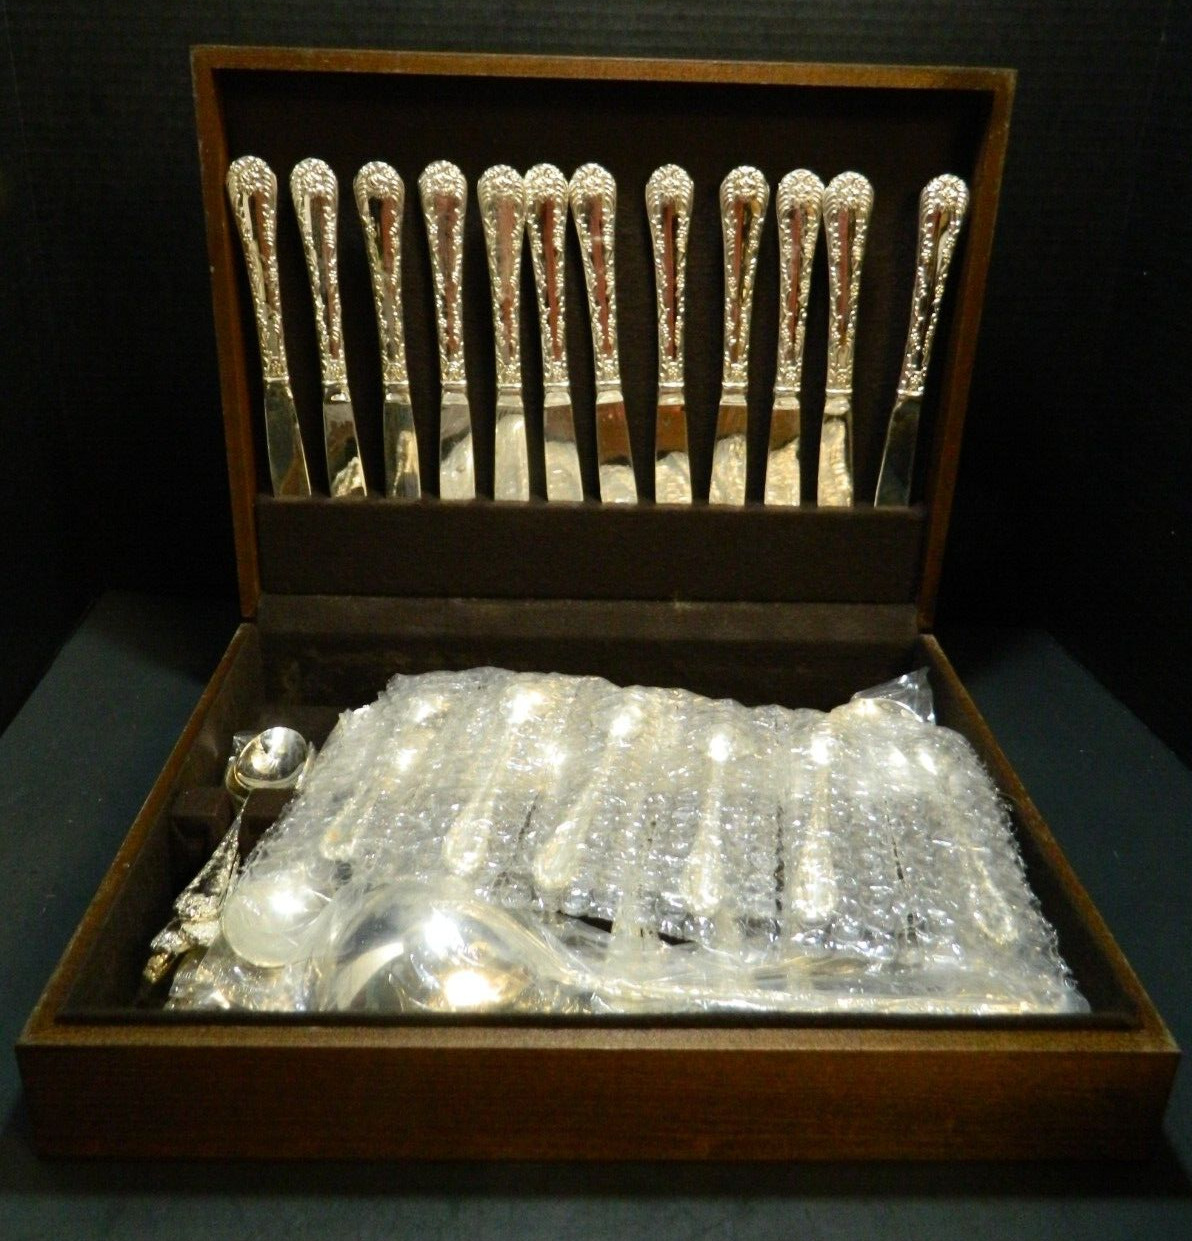 Vintage 63 Piece Wm. Rogers & Sons Enchanted Rose Flatware Set In Wooden Box VG